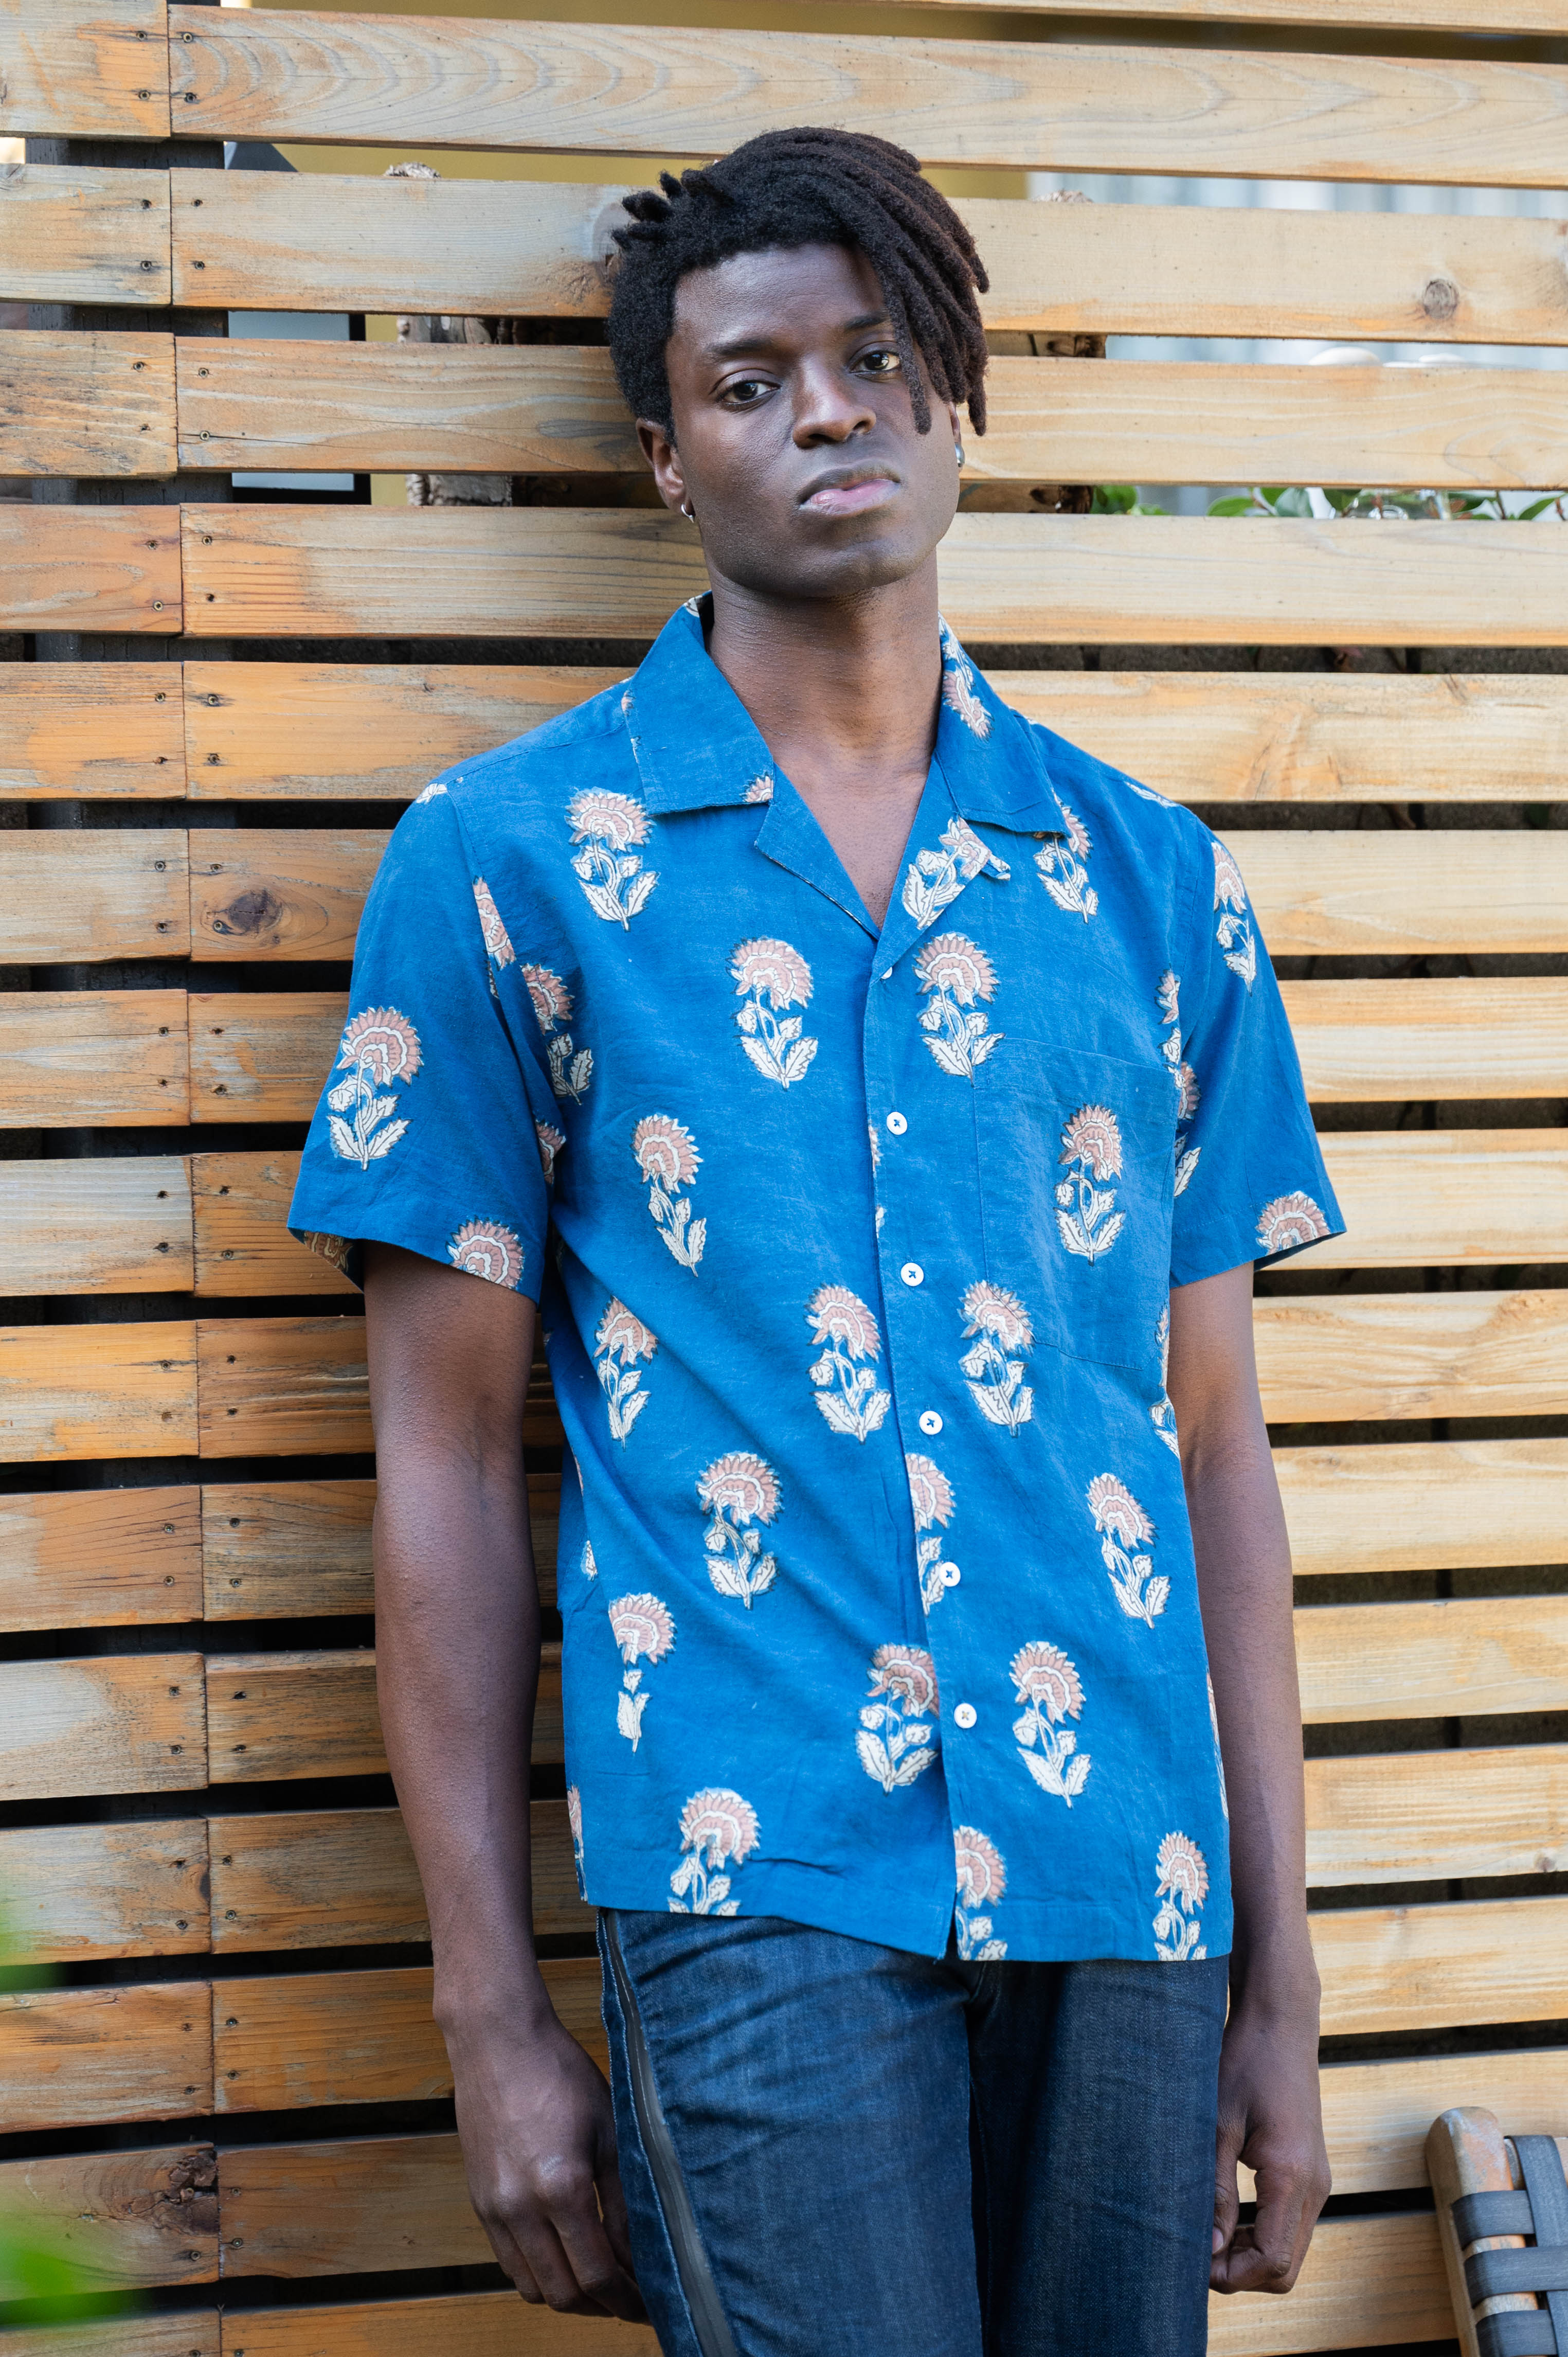 Hand Block Printed 'The Don' Camp Collar Shirt in Blue Tribal Floral Print